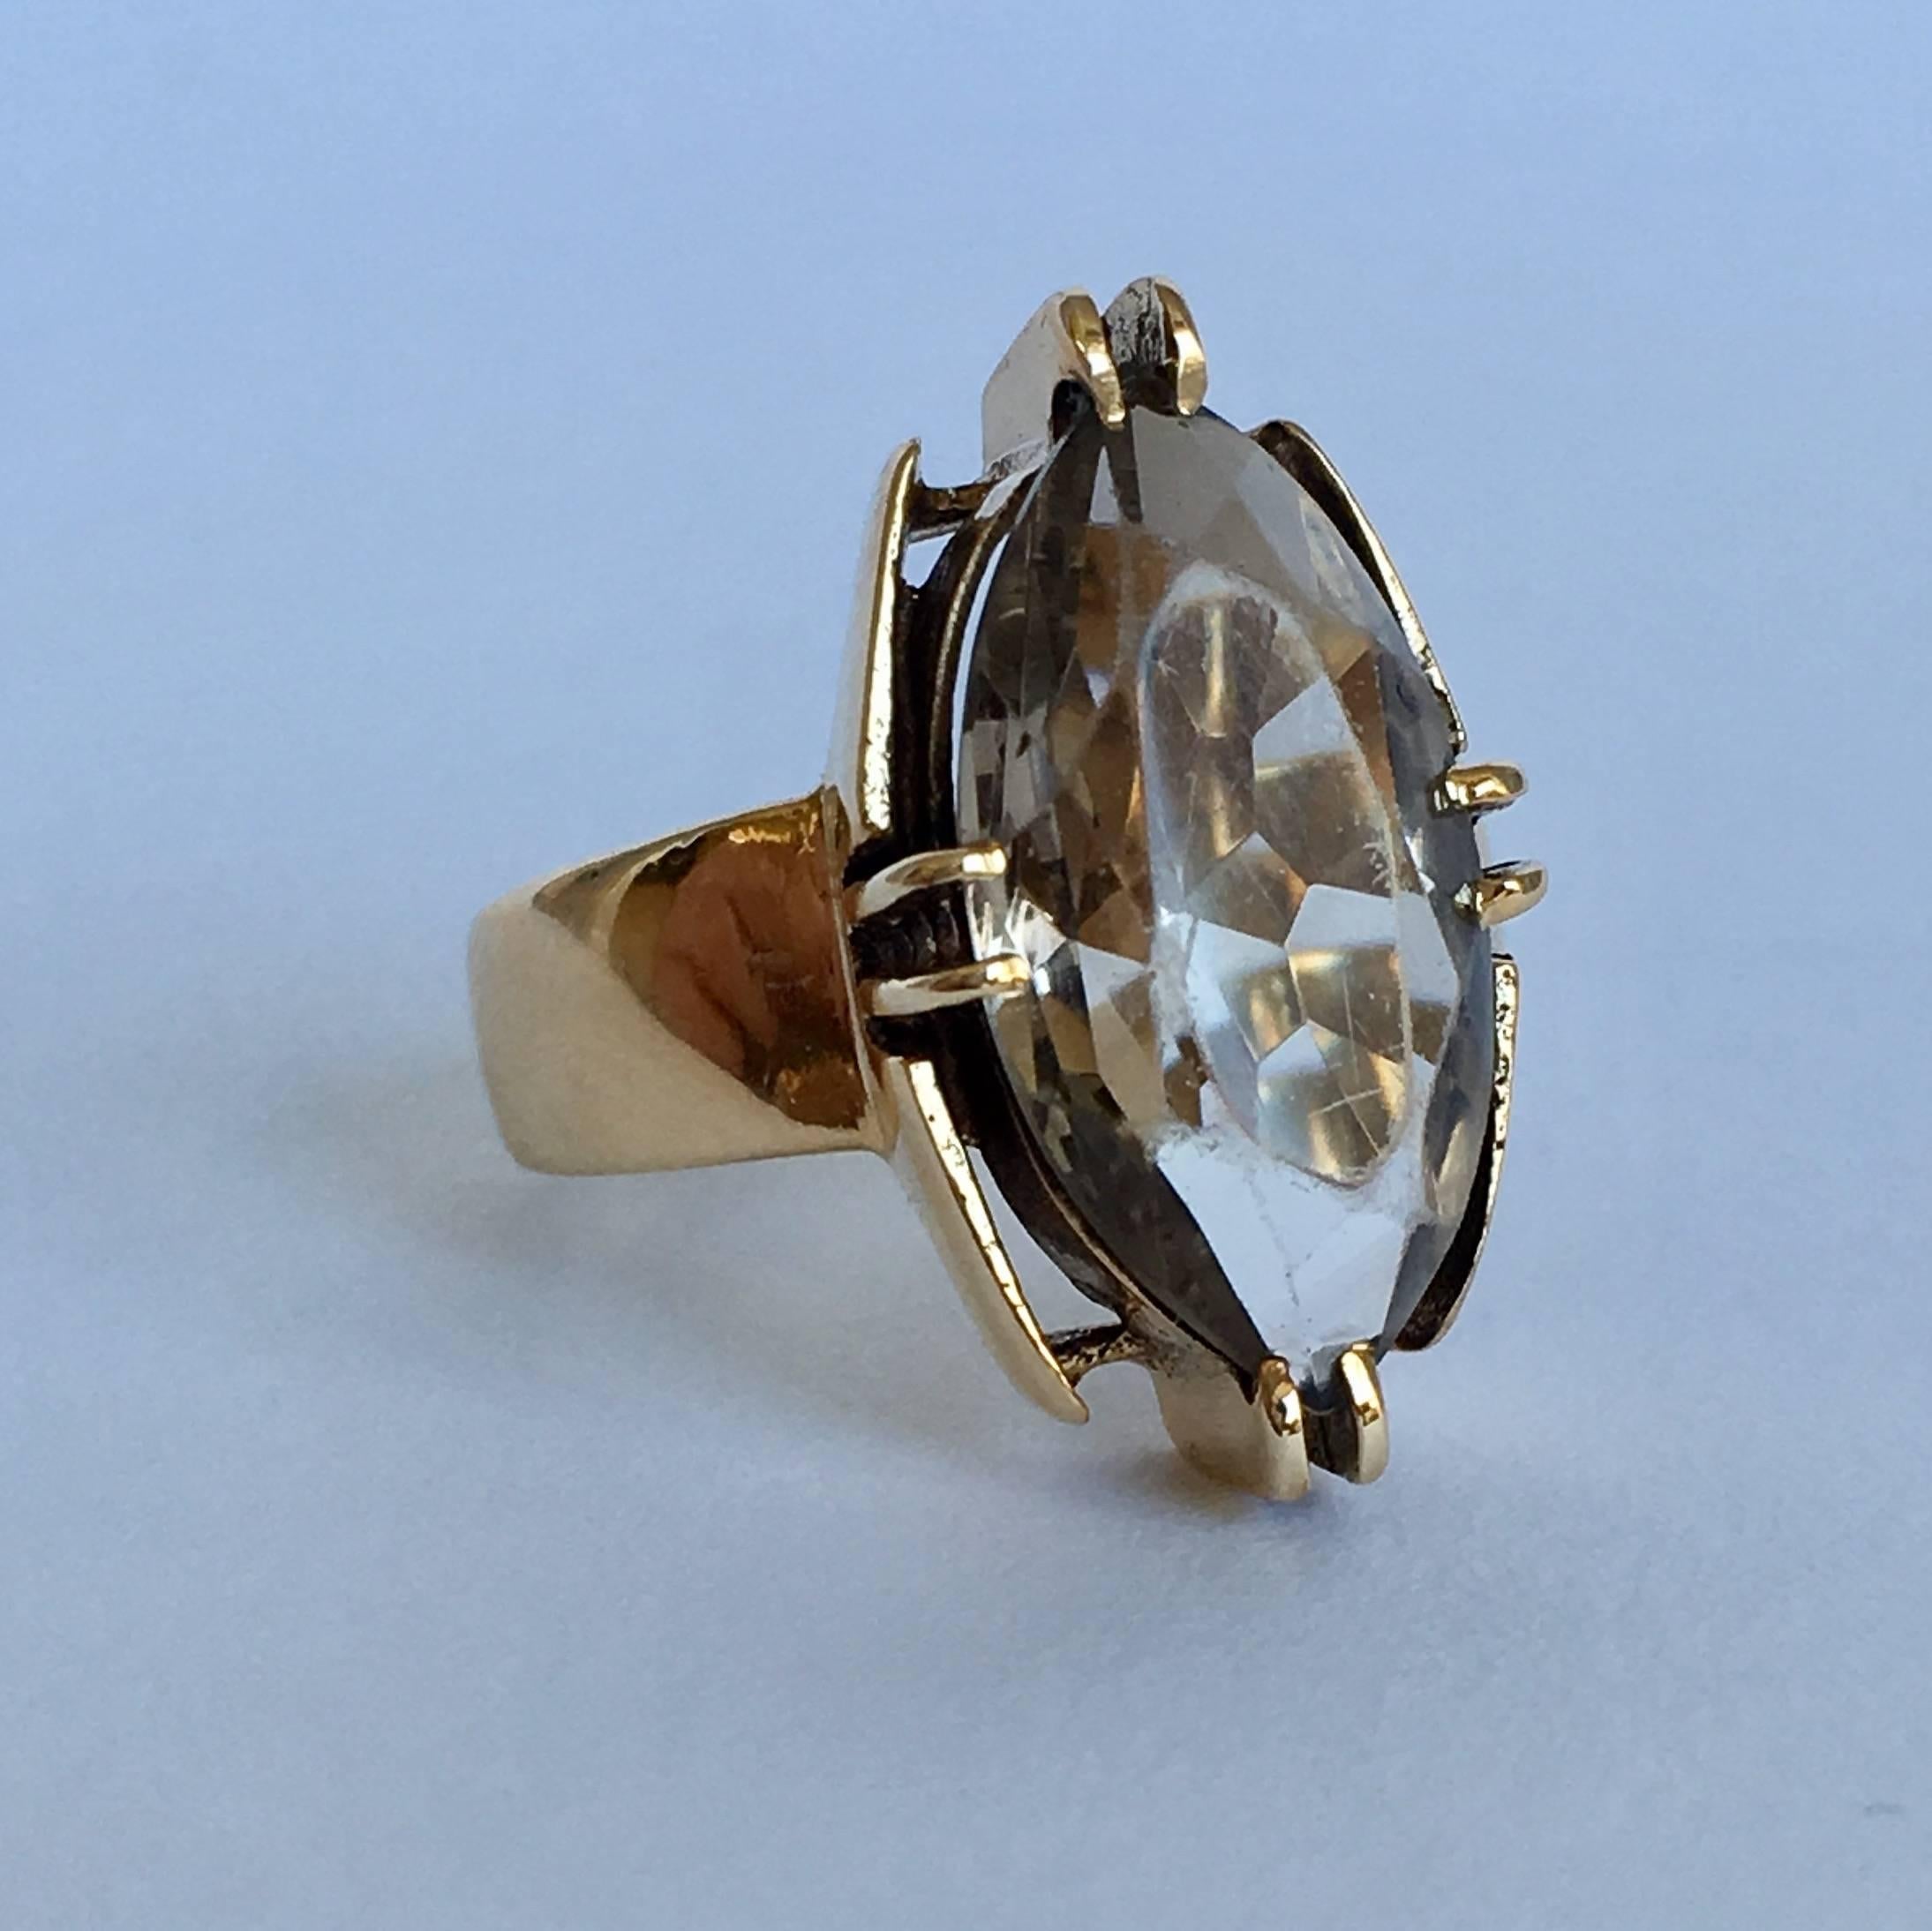 This chunky smoky quartz 9ct gold ring oozes midcentury appeal. The hallmarks tell us it was assayed in London in 1965, peak swinging sixties era. (No doubt it has some tales to tell.) From claw to claw, the ring is 2.2cm high – neat enough for